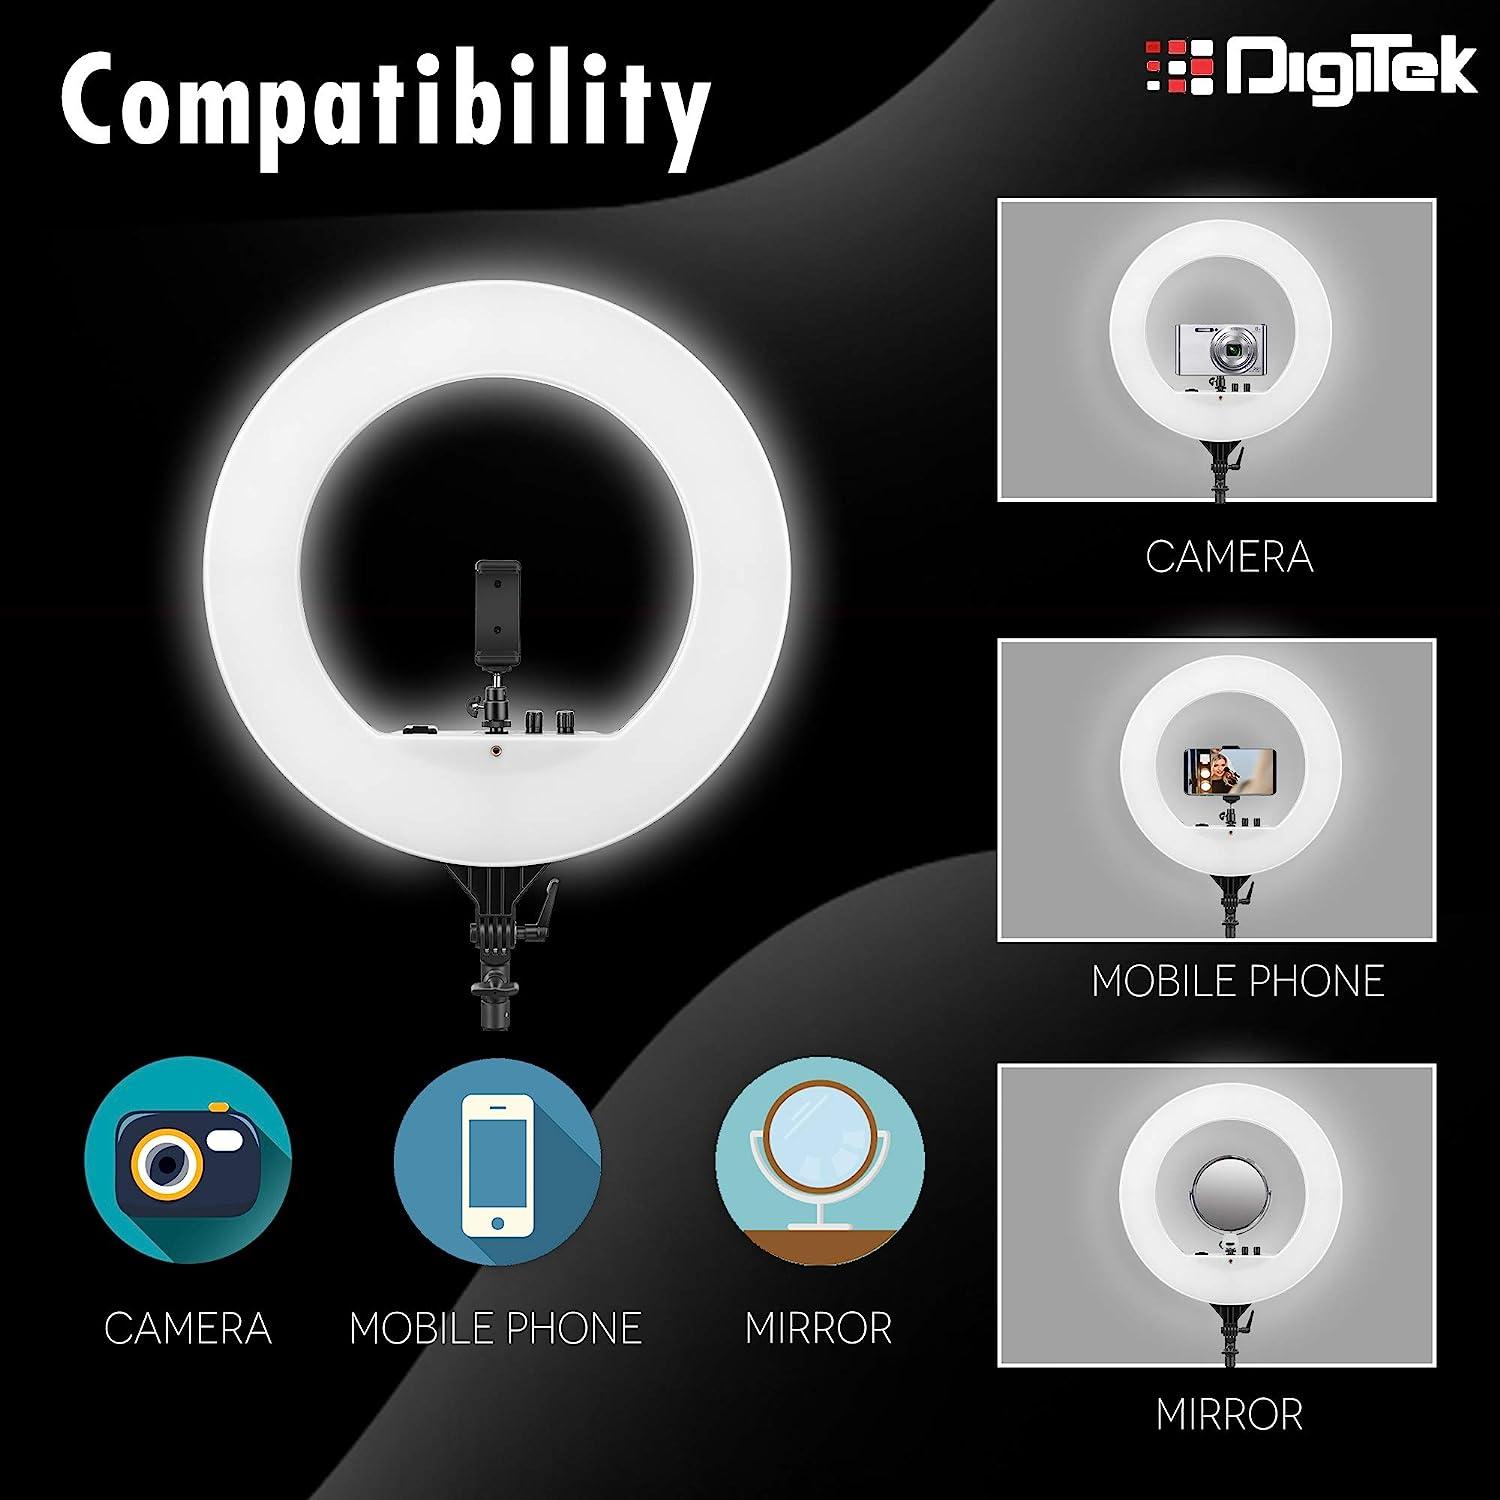 Digitek (DRL 018H) Professional 46 CM (18 inch) Big LED Ring Light with 2 Color Modes Dimmable Lighting, Photo-shoot, Video shoot, Live Stream, Makeup & more, Compatible with iPhone/ Android Phones & Cameras - Digitek